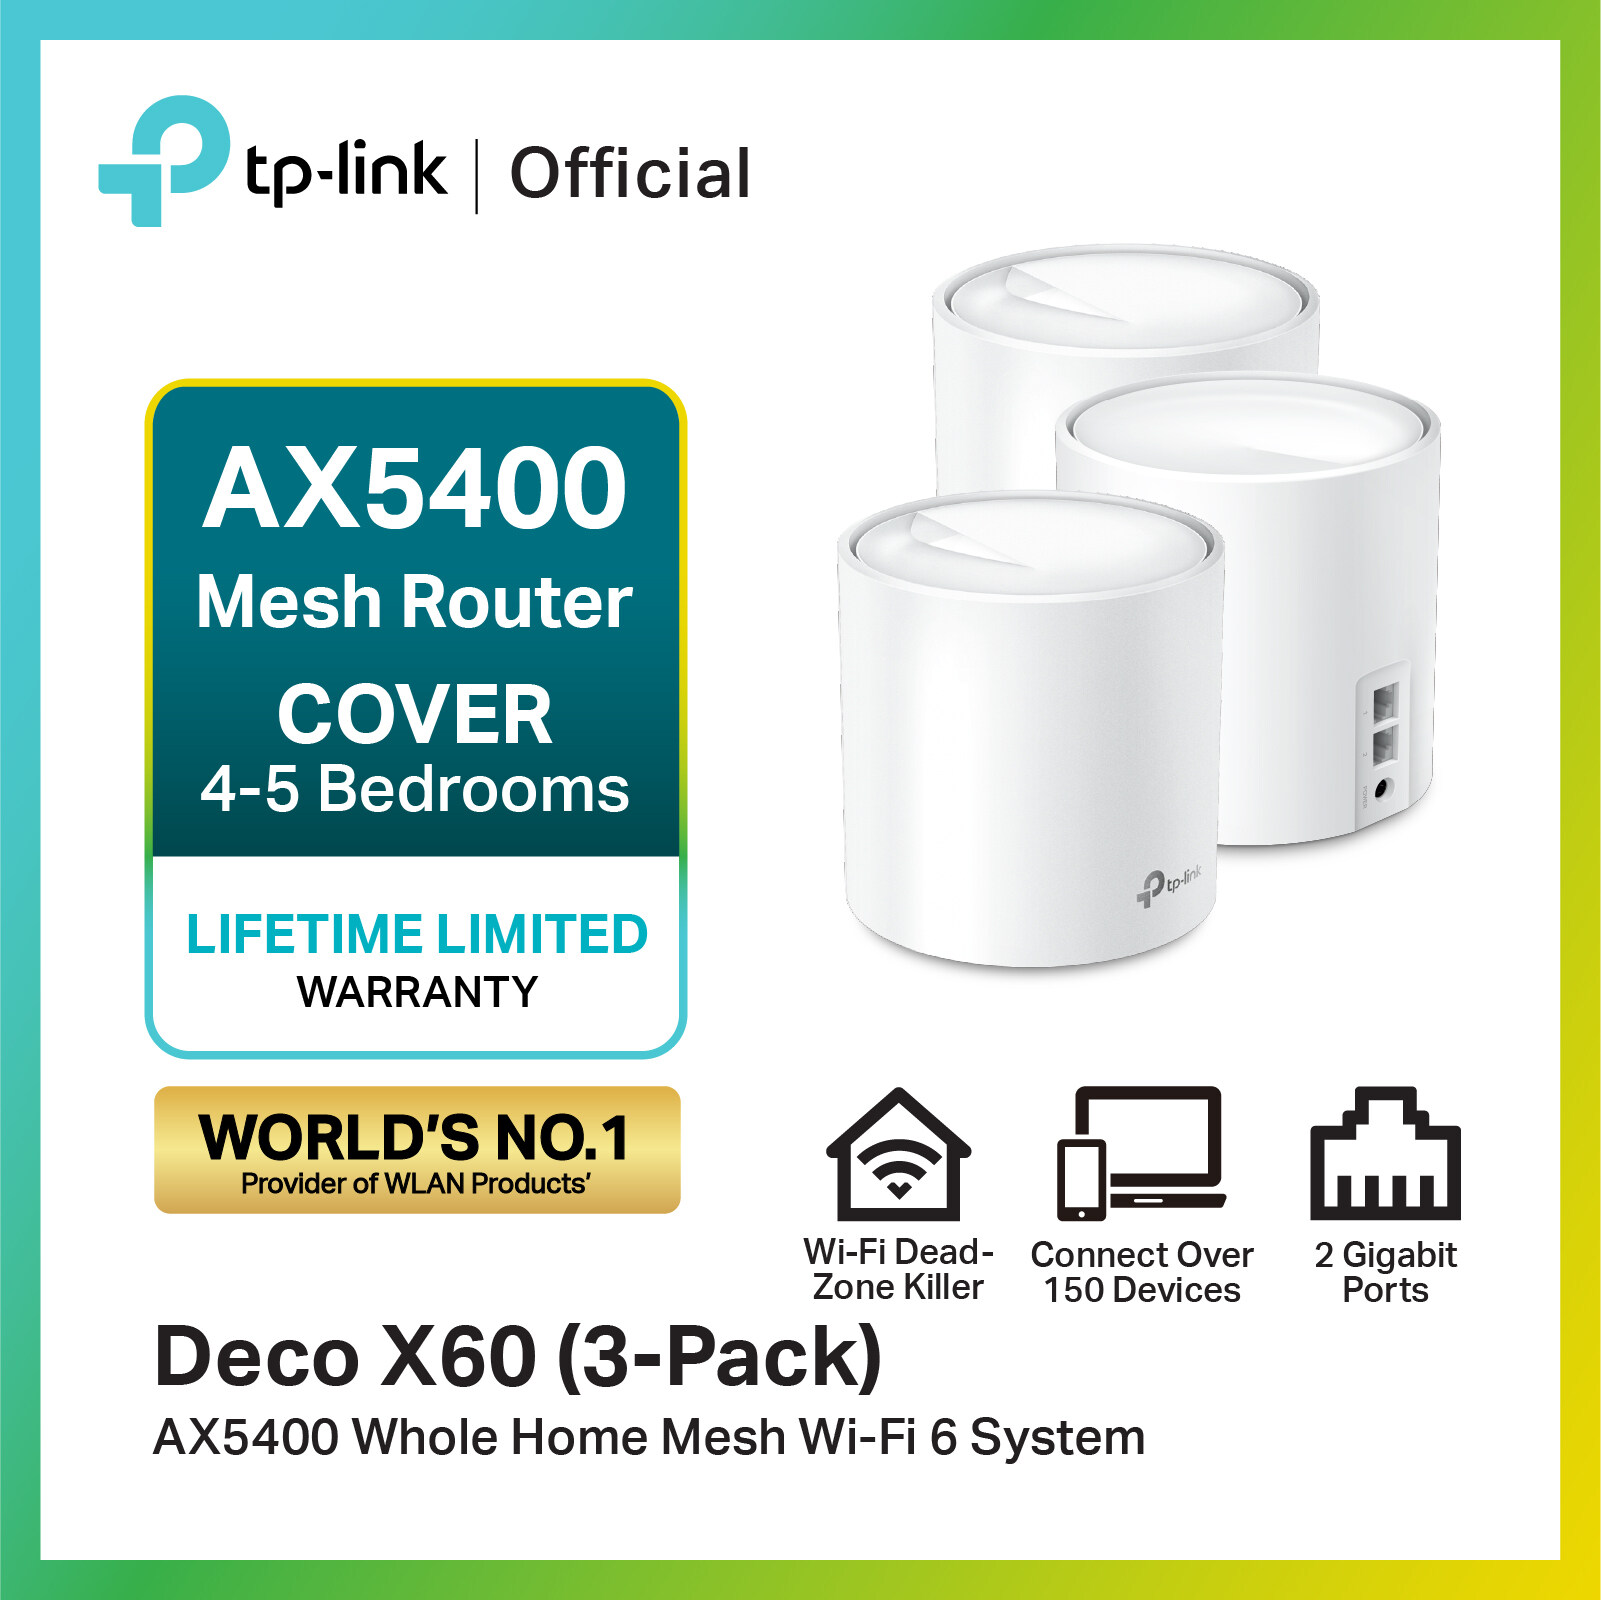 Atlas Pro 6 Dual-Band Mesh WiFi 6 Router System (AX5400)